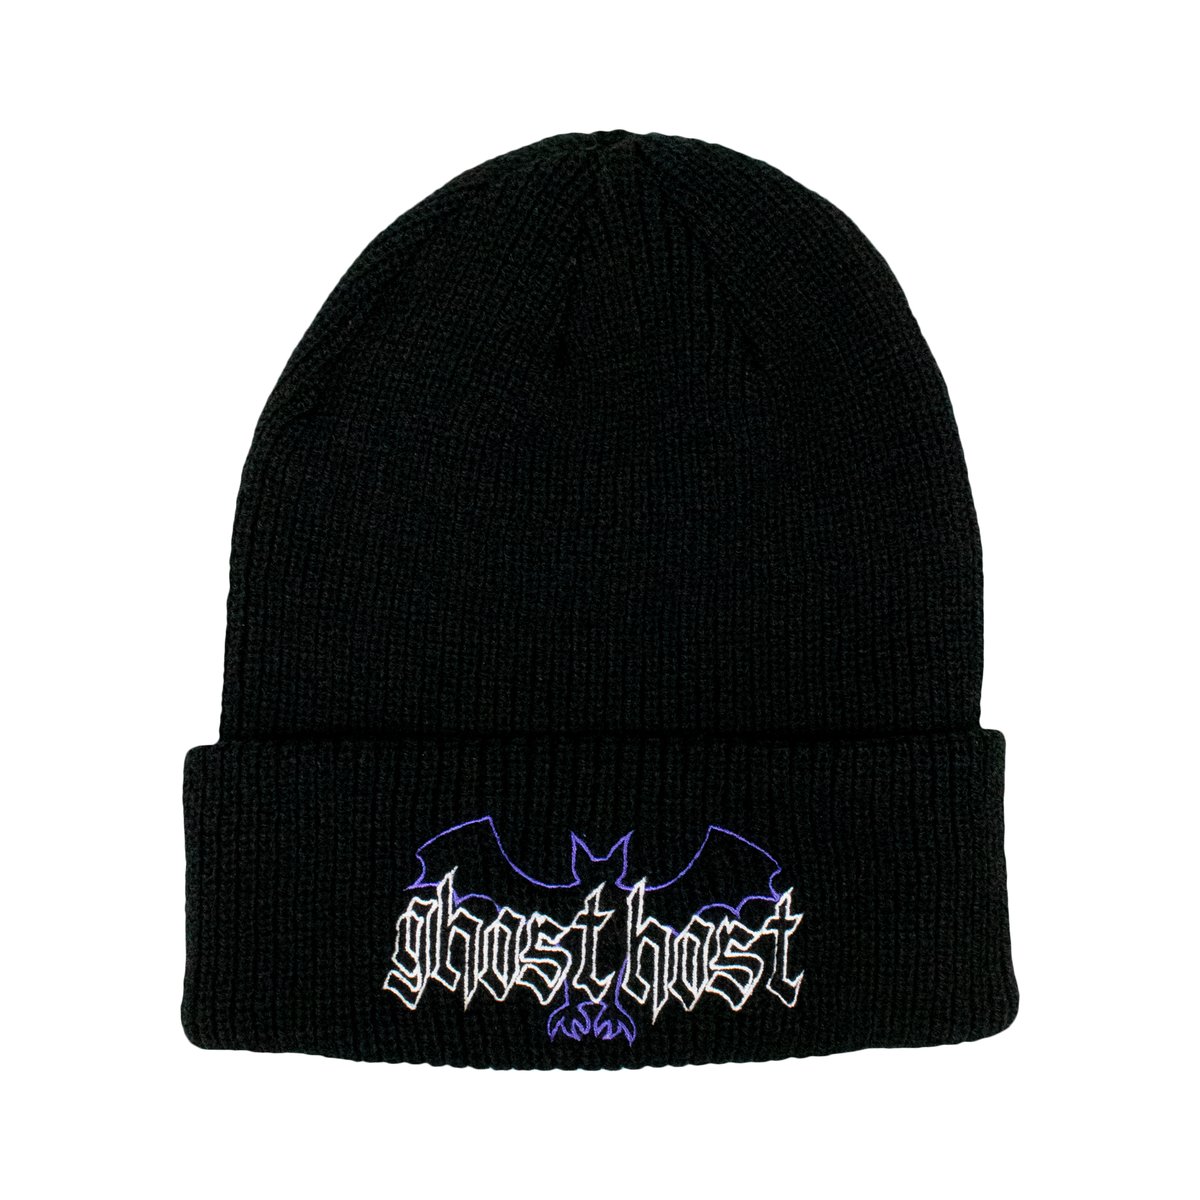 Image of Ghost Host Beanie